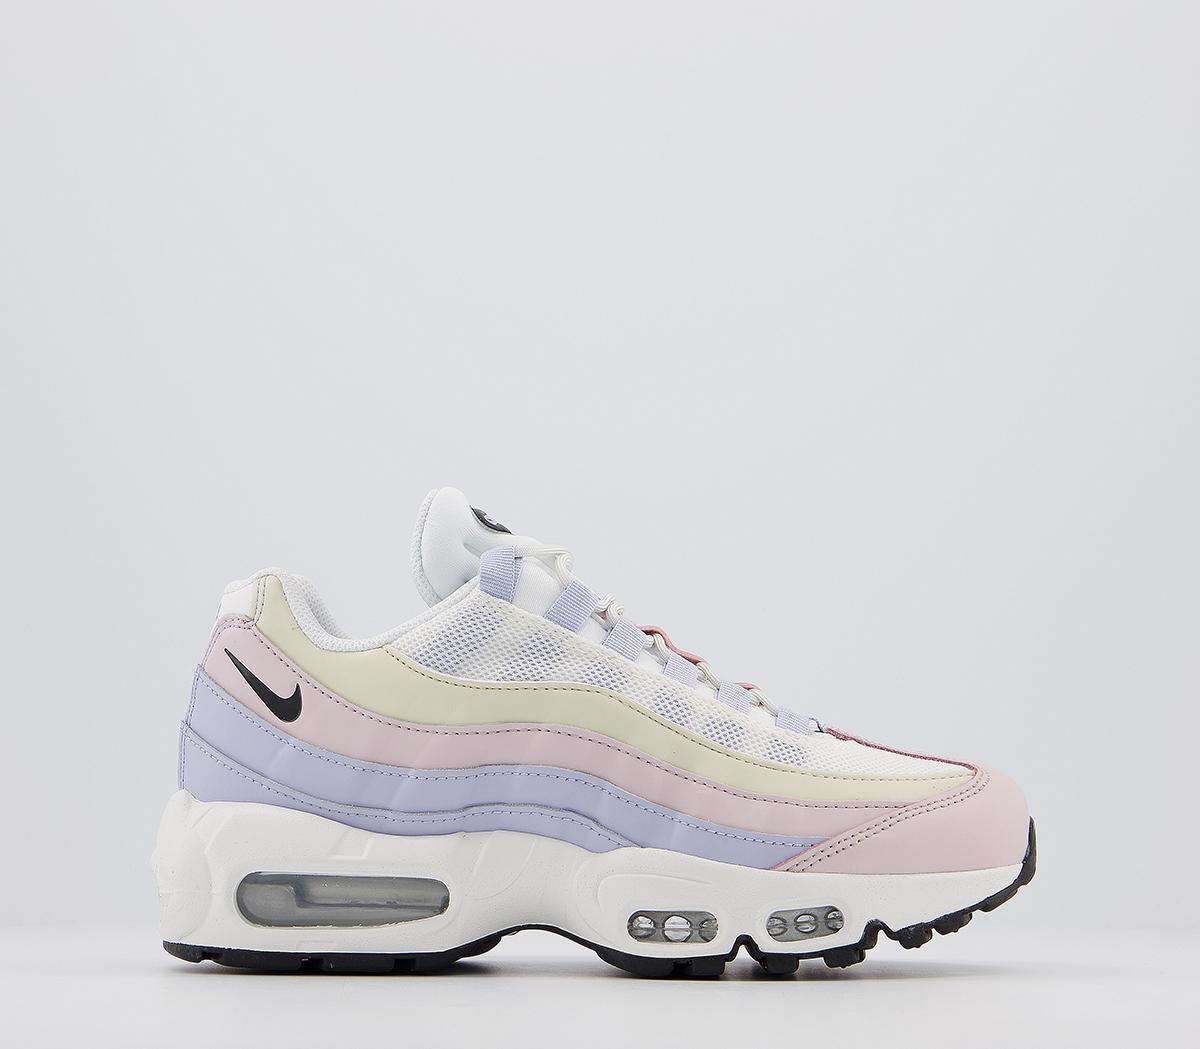 womens air max 95 trainers